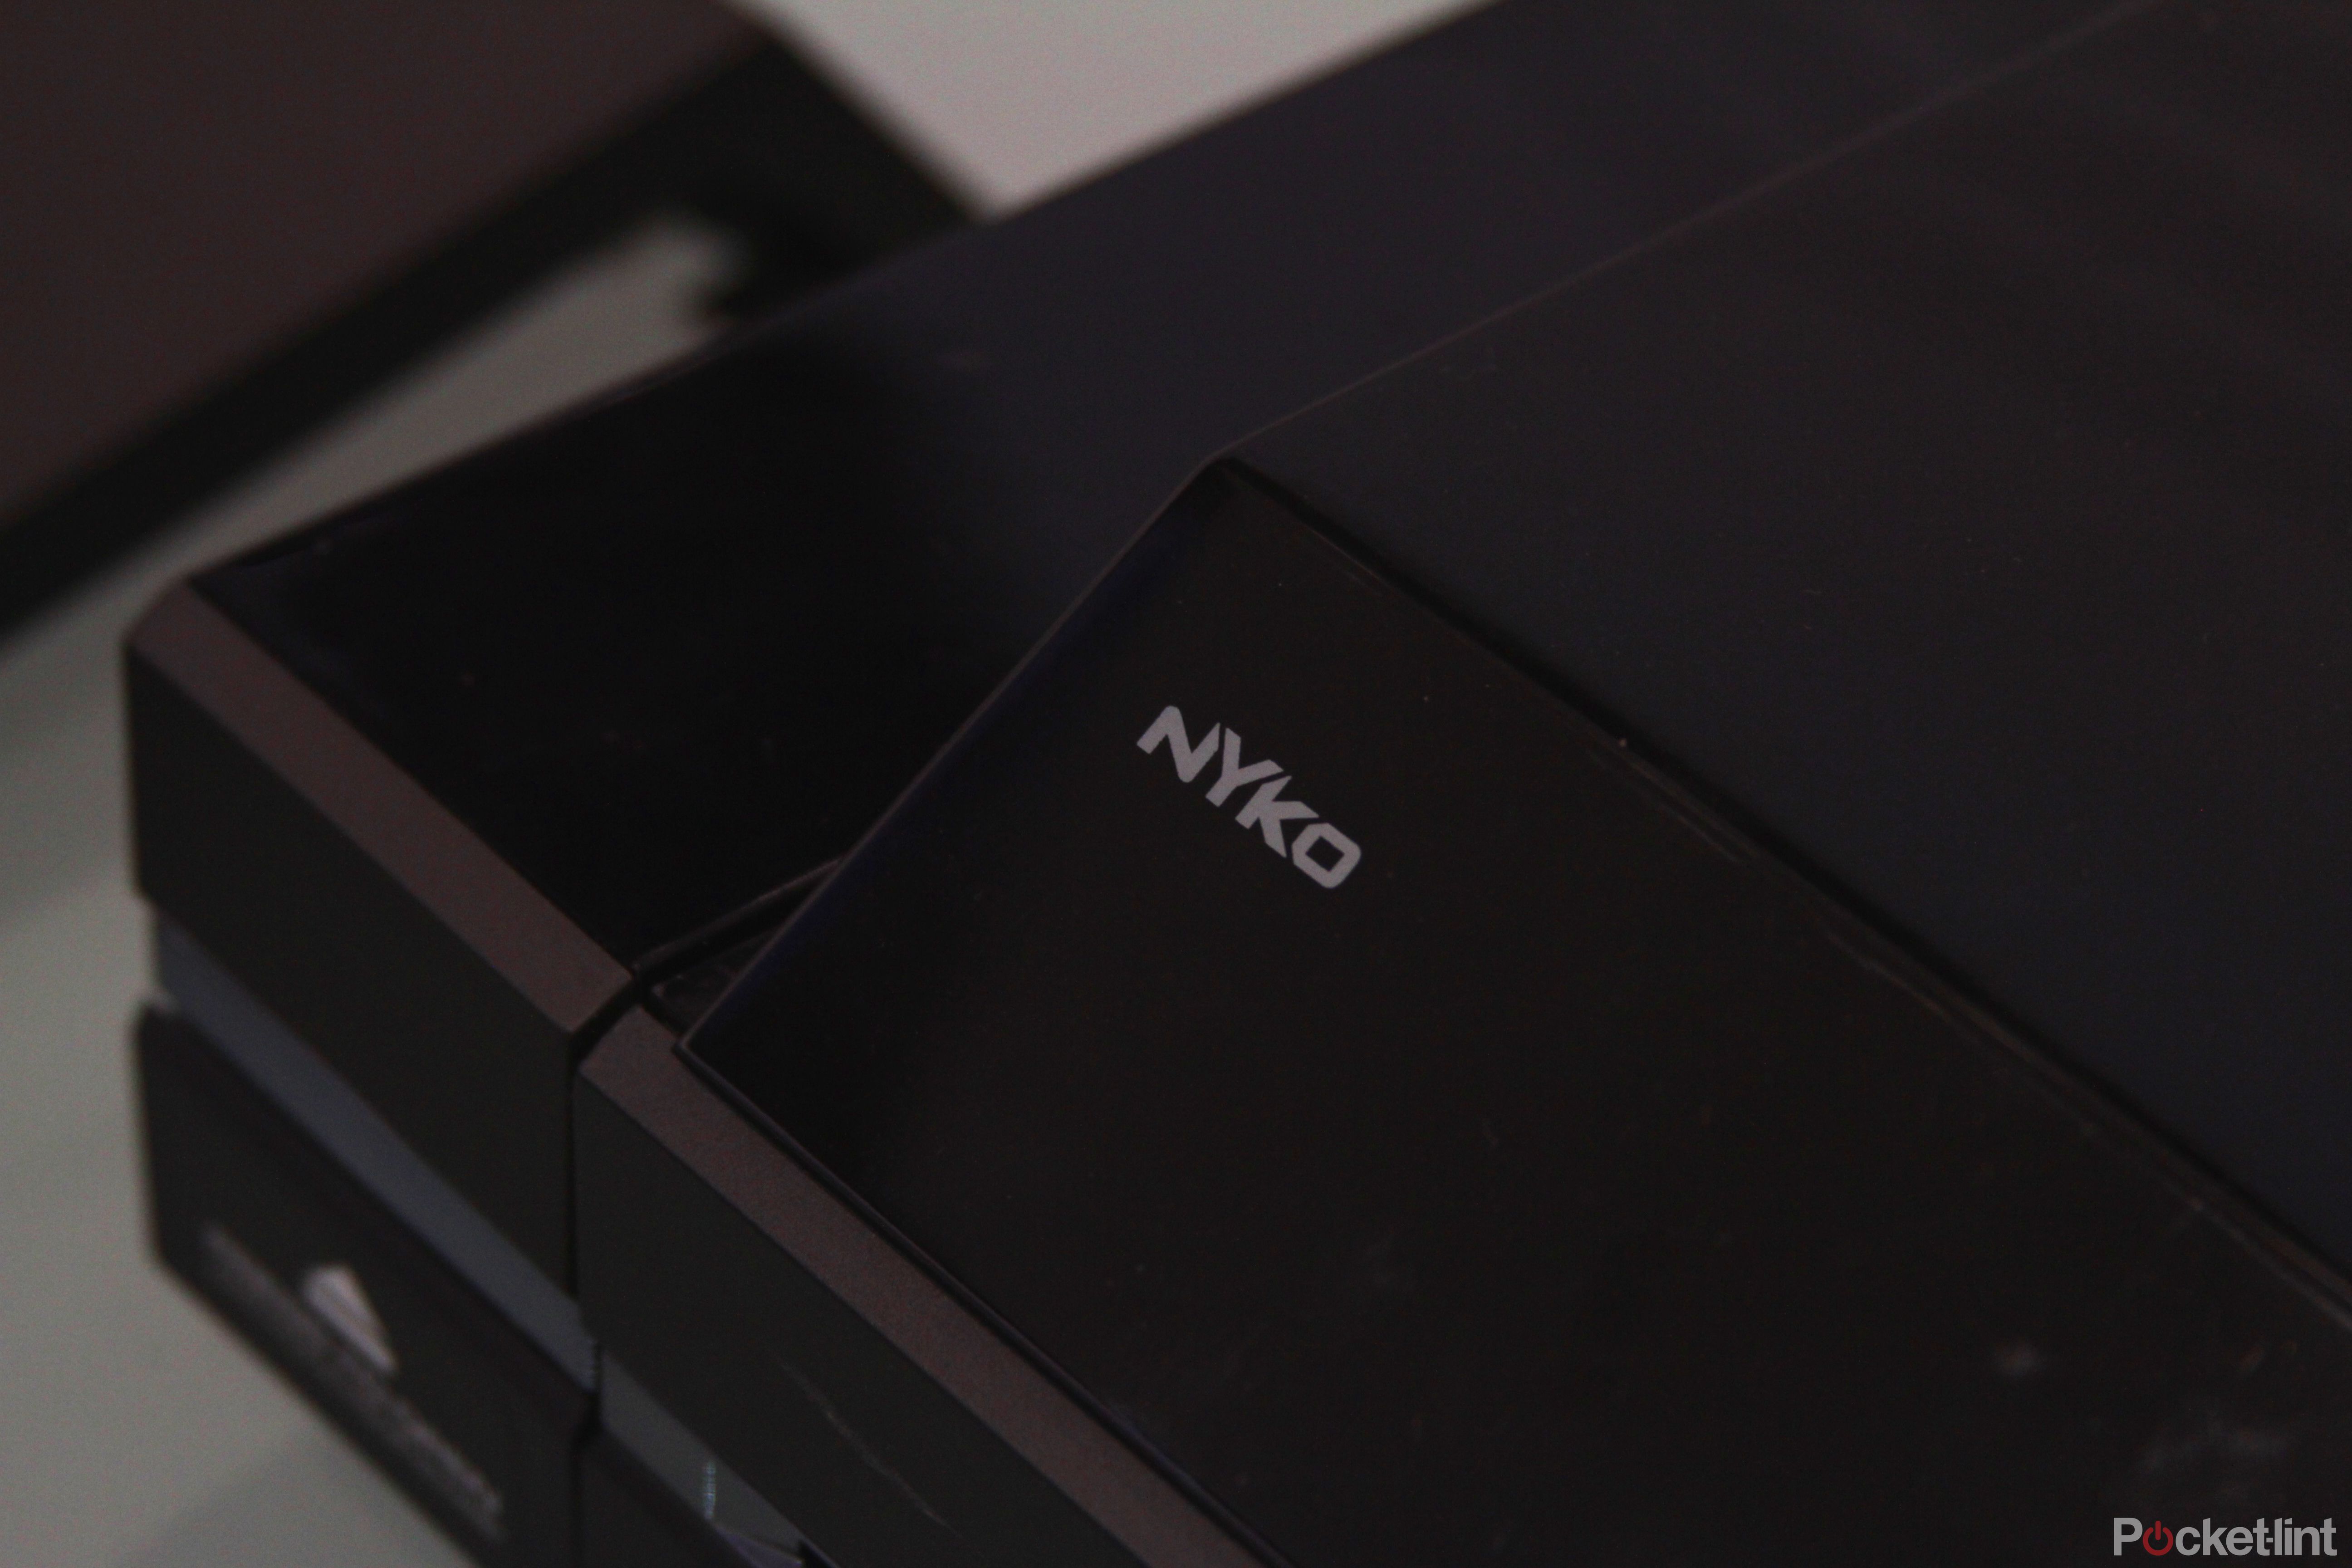 nyko has xbox one gamers covered with its new data bank enclosure type pad keyboard and more hands on  image 1